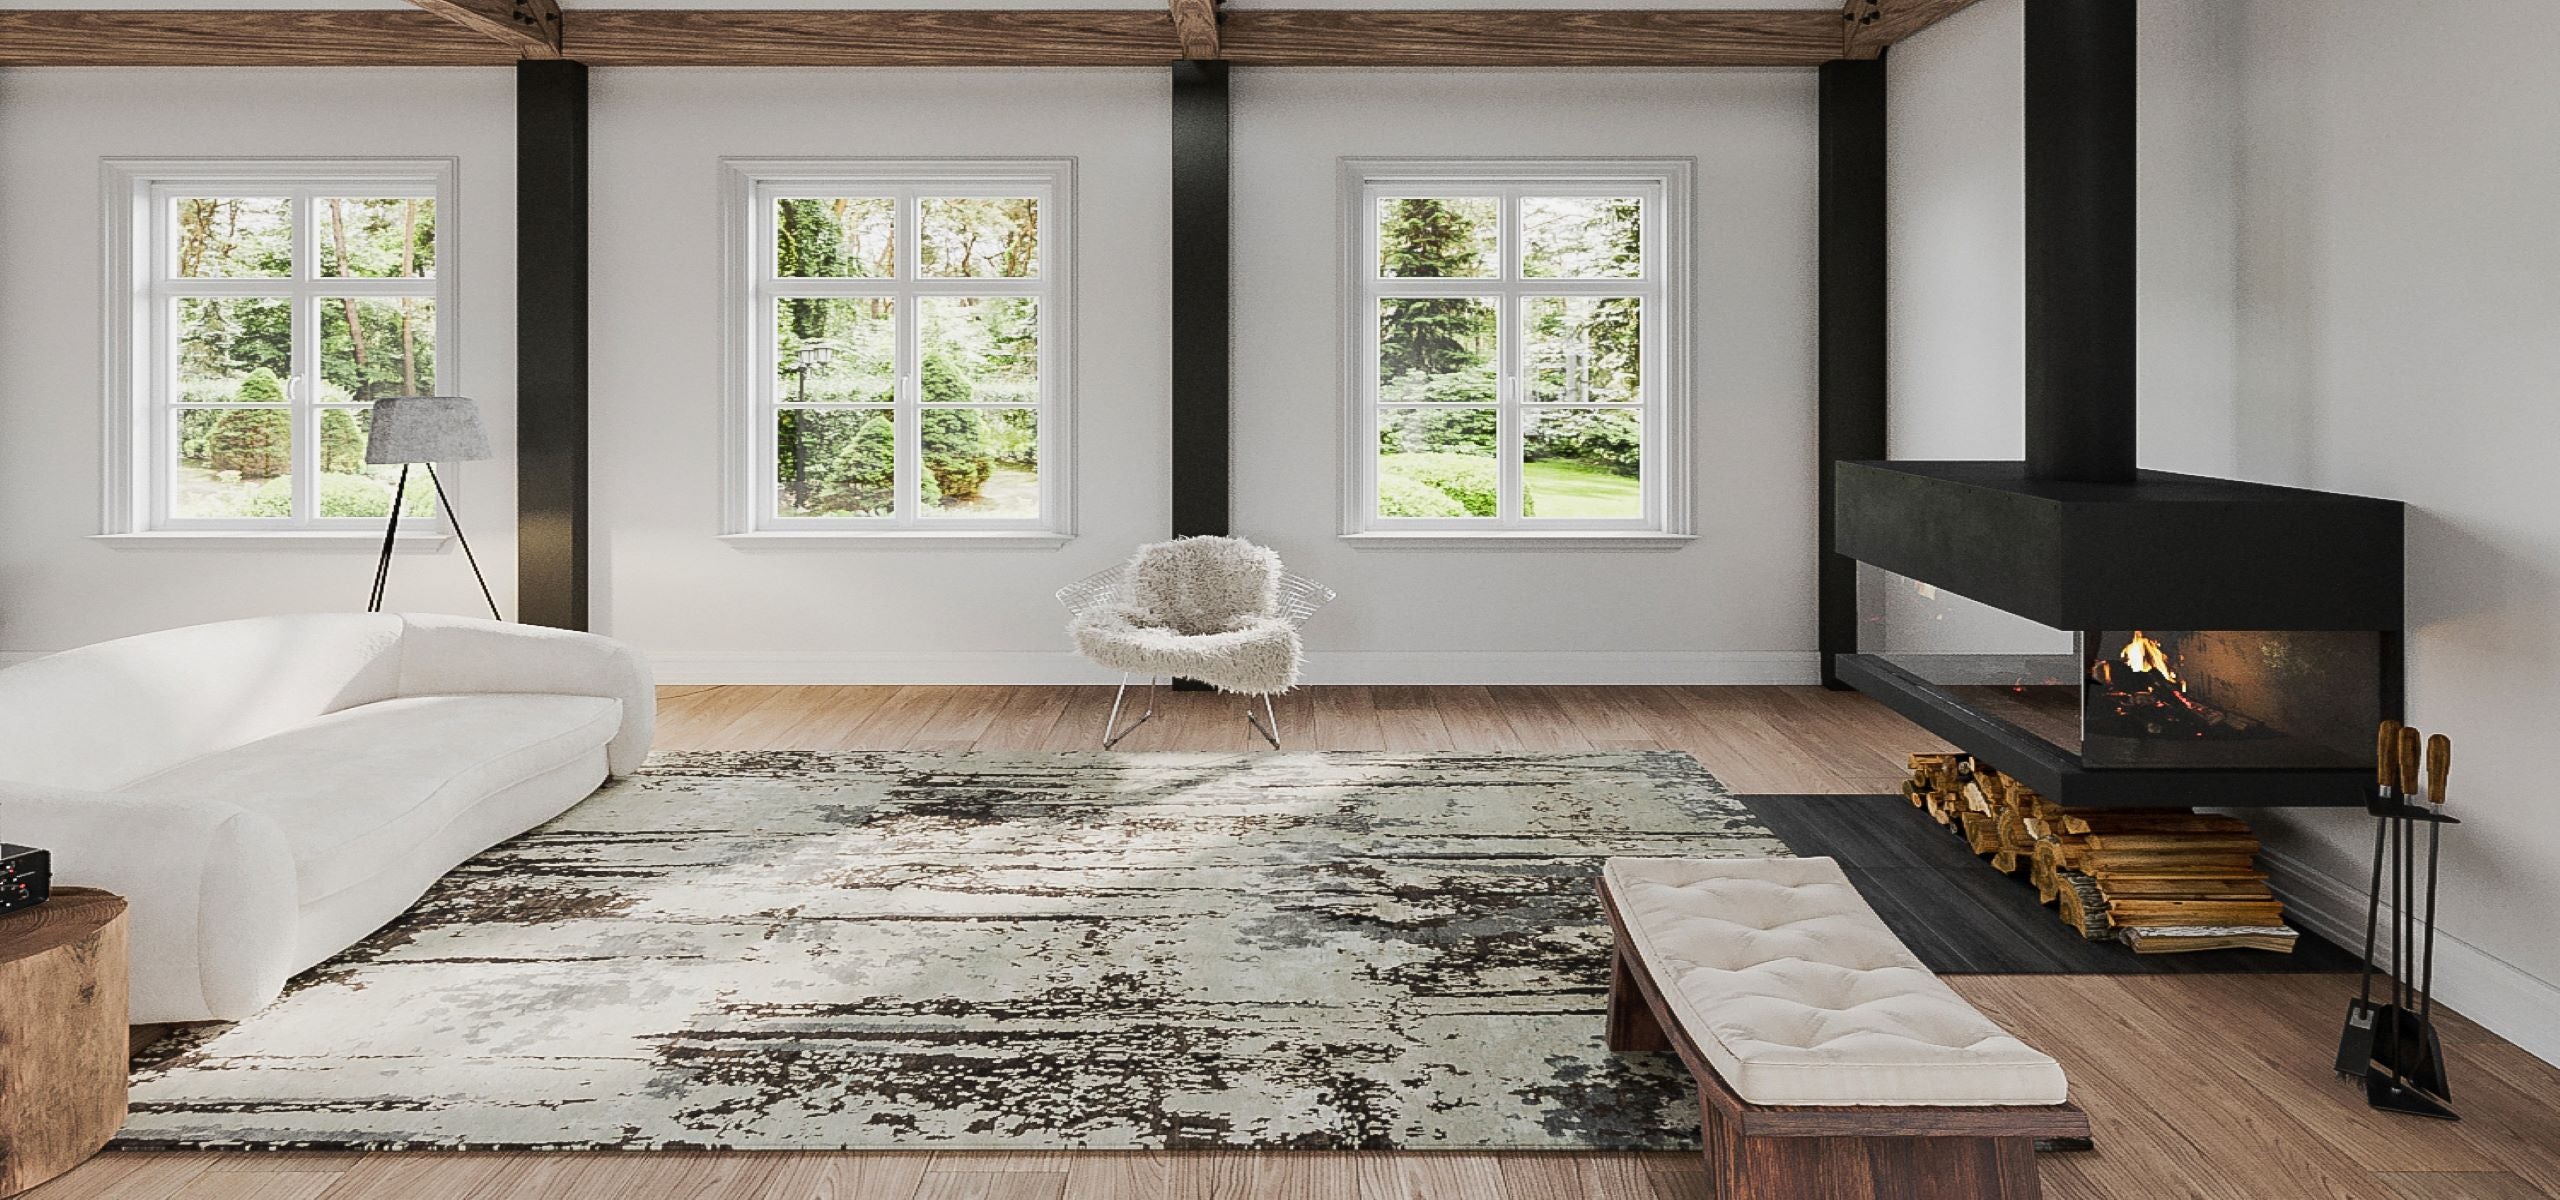 How to Clean an Area Rug to Make It Look Like New Again